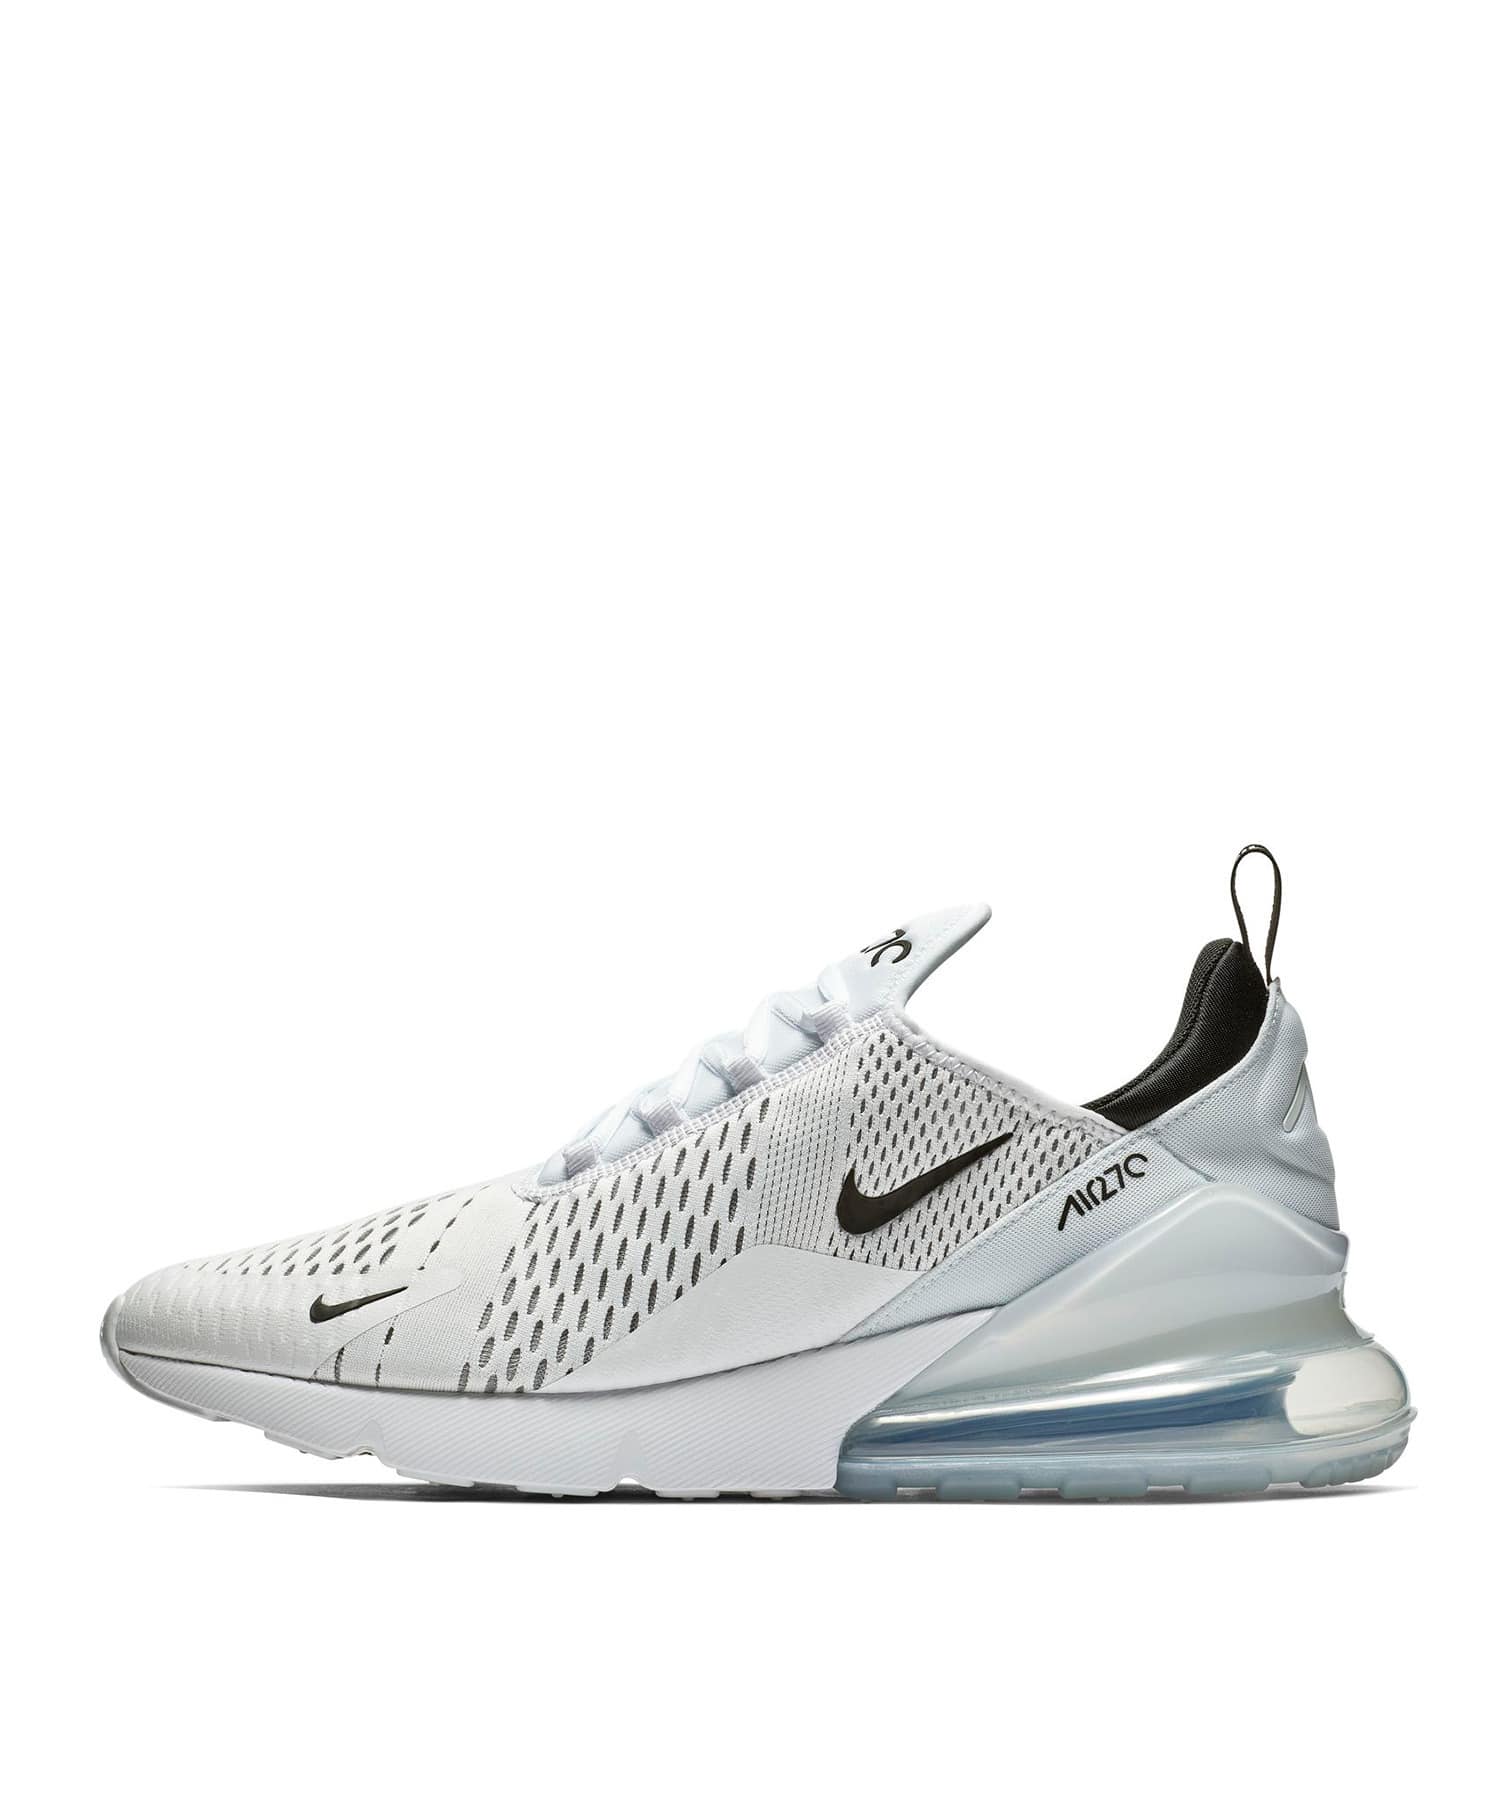 NIKE / AIR MAX 270｜ESTNATION ONLINE STORE｜エストネーション 公式通販